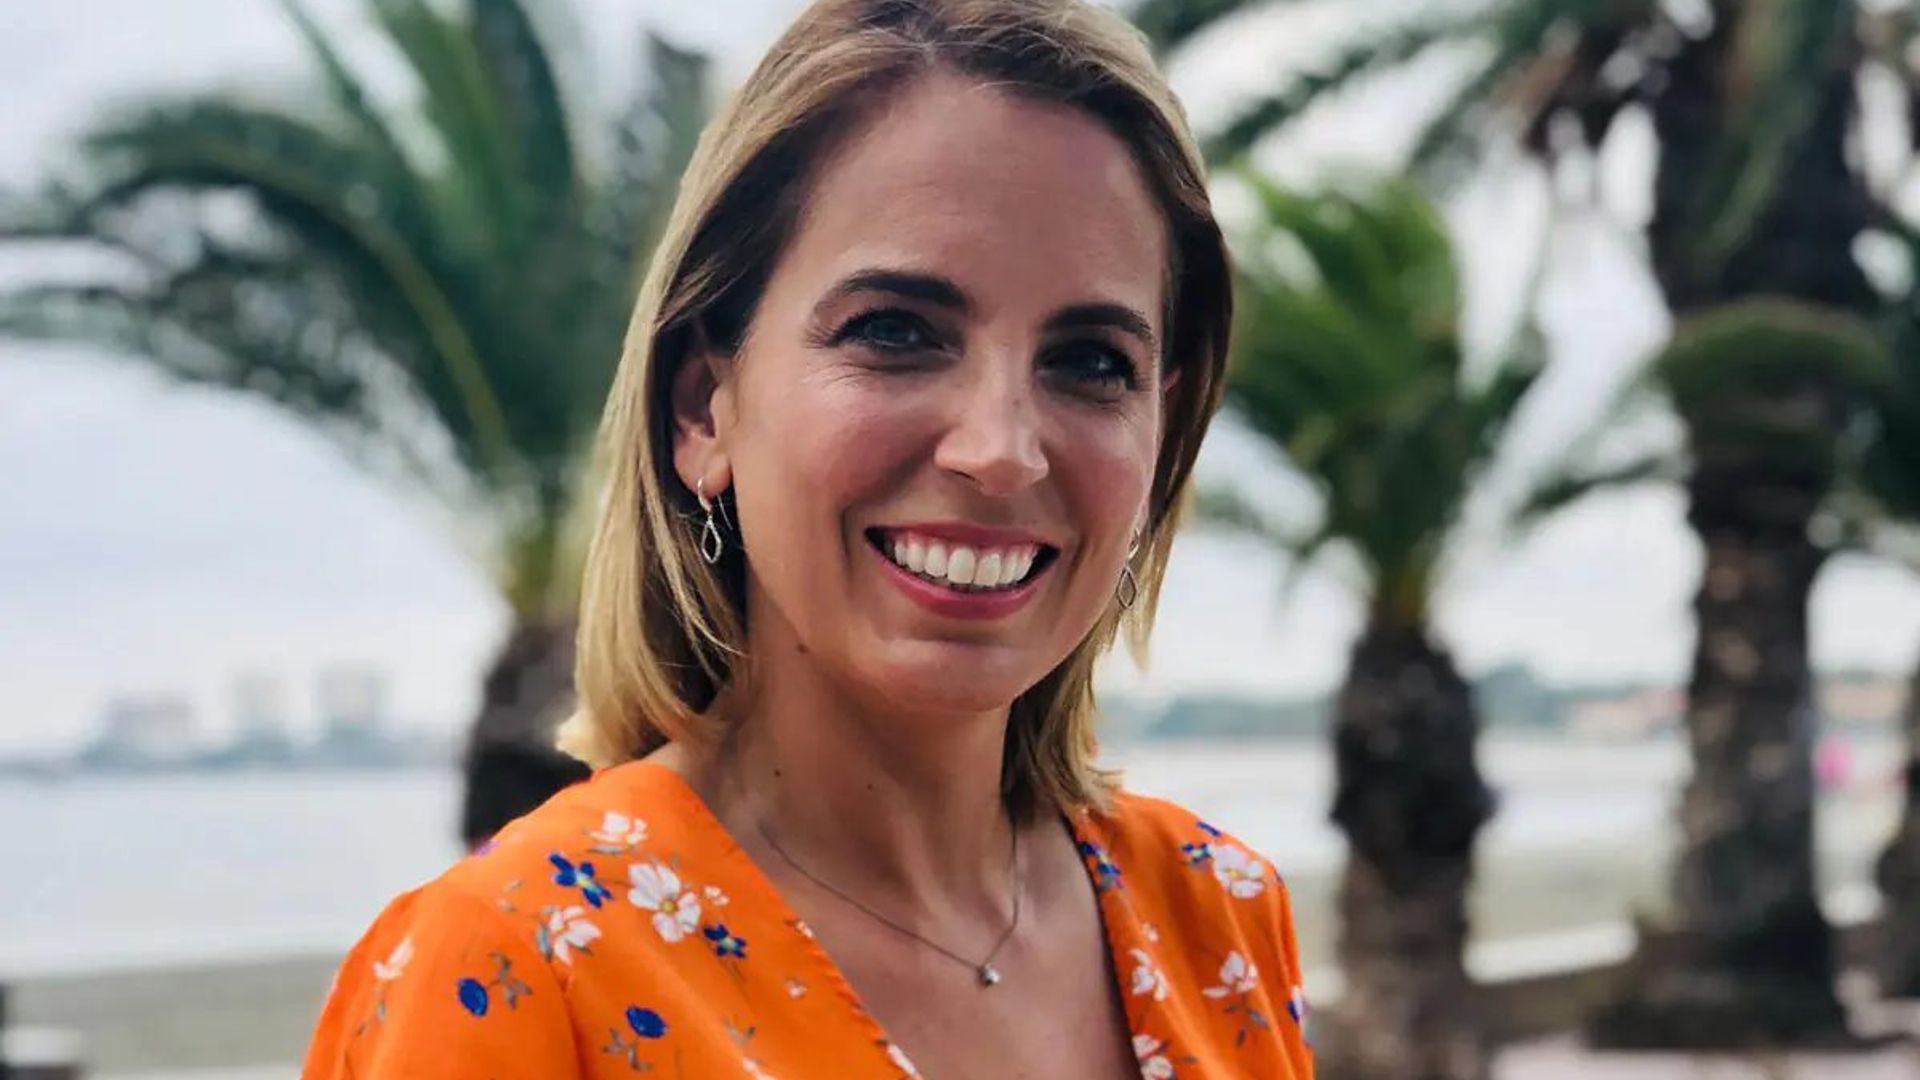 A Place in the Sun's Jasmine Harman shares glamorous pictures on set of new season - and fans are loving her outfit!